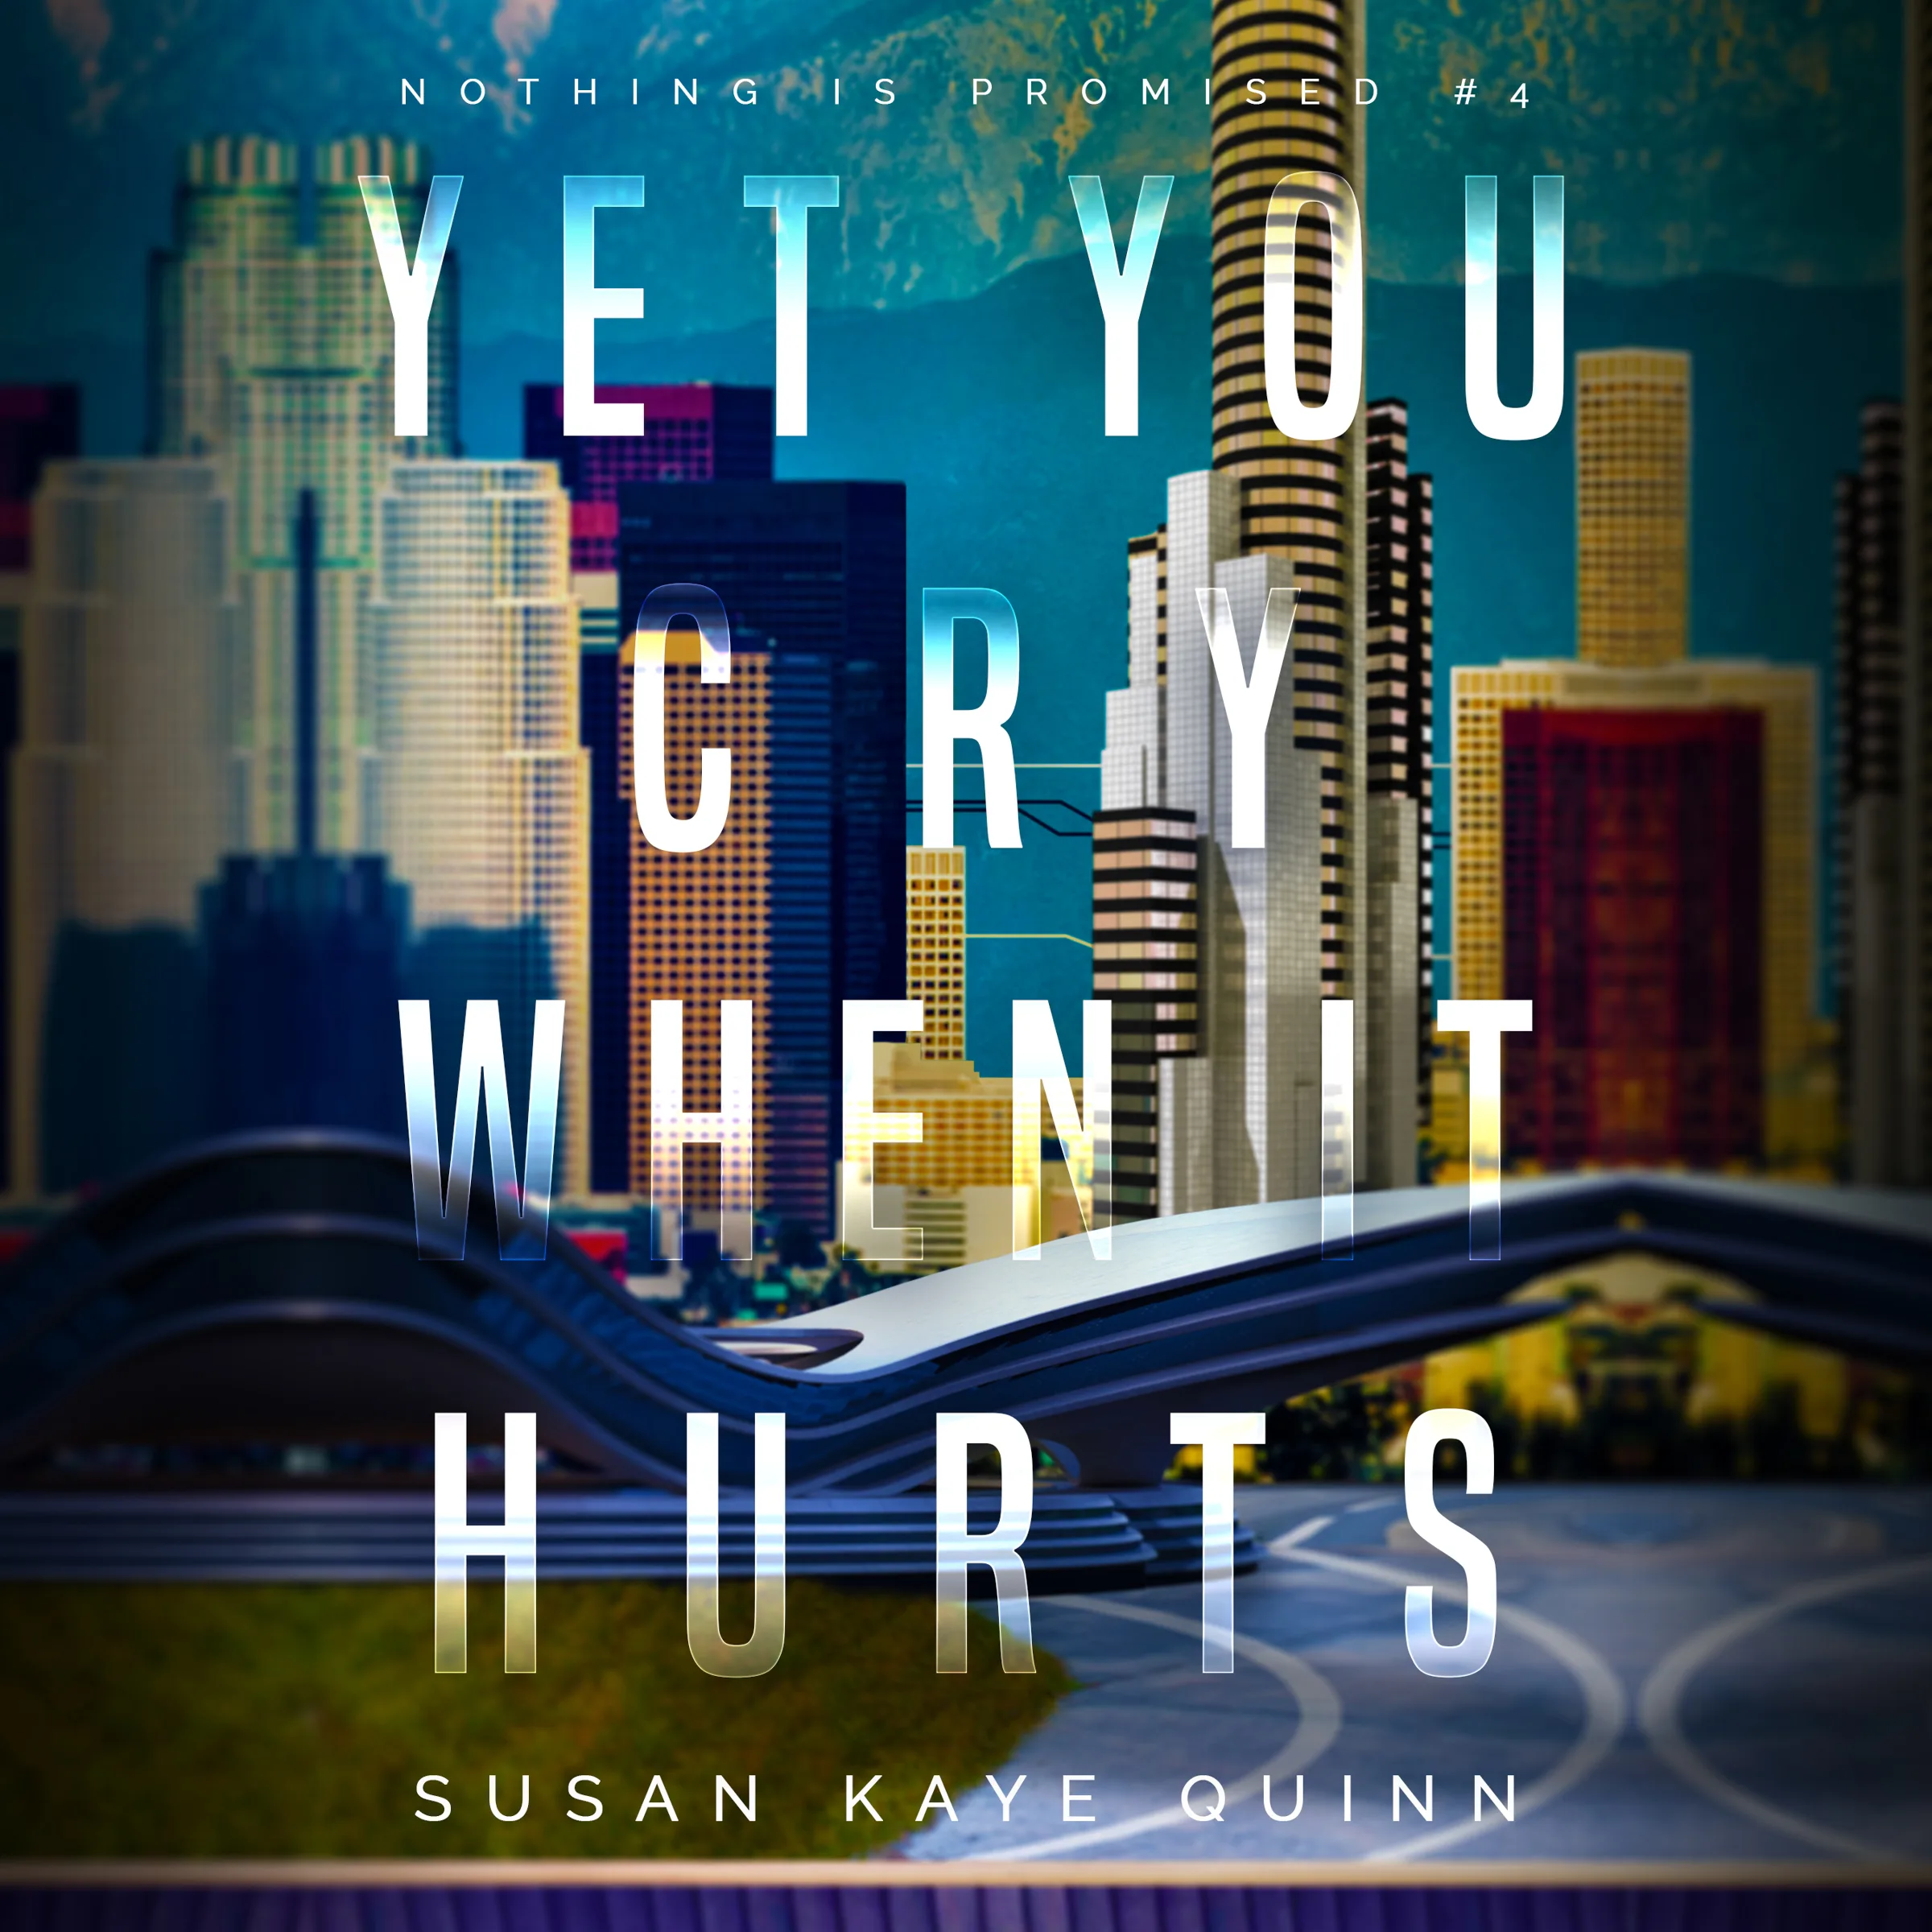 Yet You Cry When it Hurts by Susan Kaye Quinn